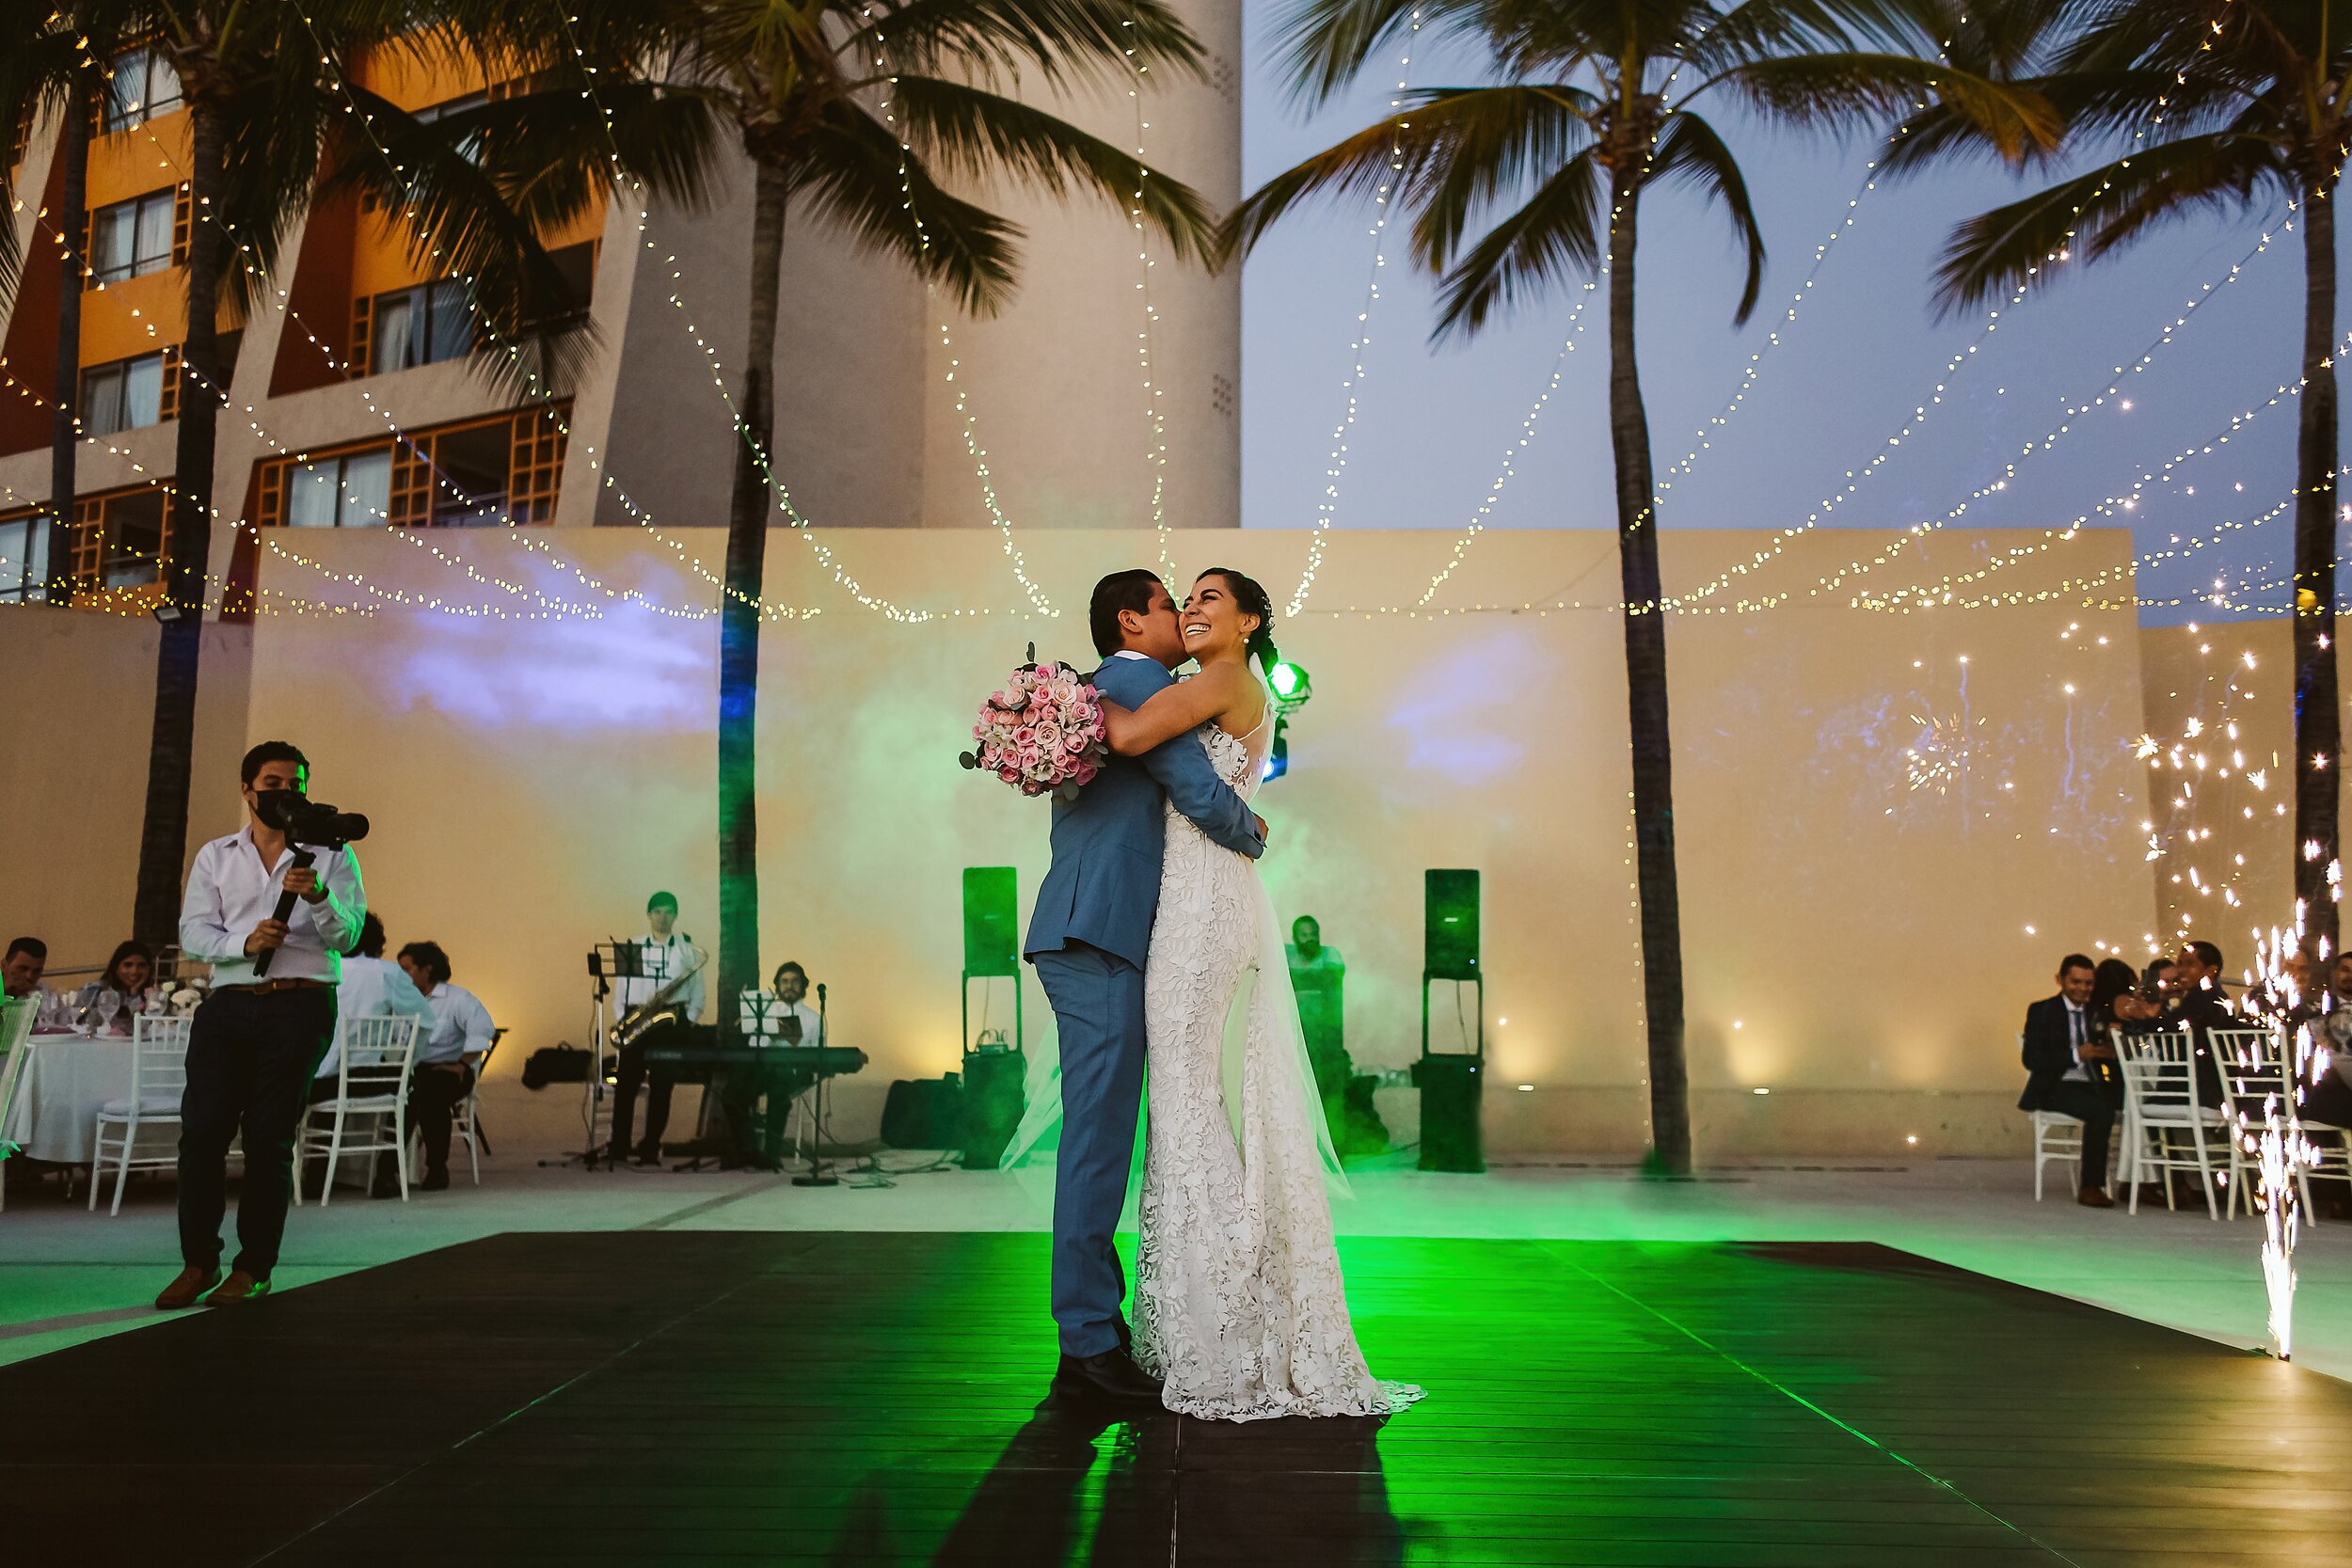 Westin Club Regina — Wedding photographer in Mexico // Puerto Vallarta and  Cabo San Lucas — Your wedding, the WAY it should be told!